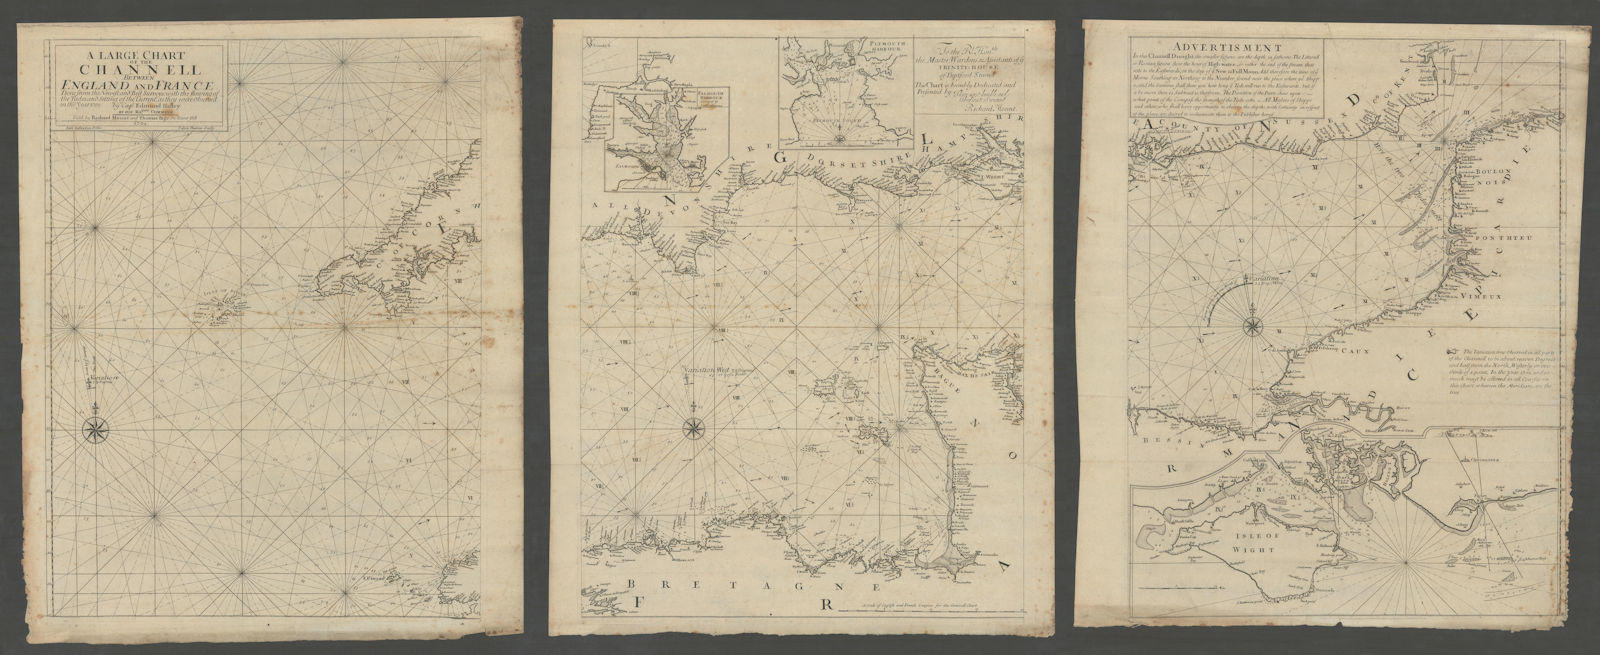 A Large Chart of the Channell between England and France. Tides. HALLEY 1702 map